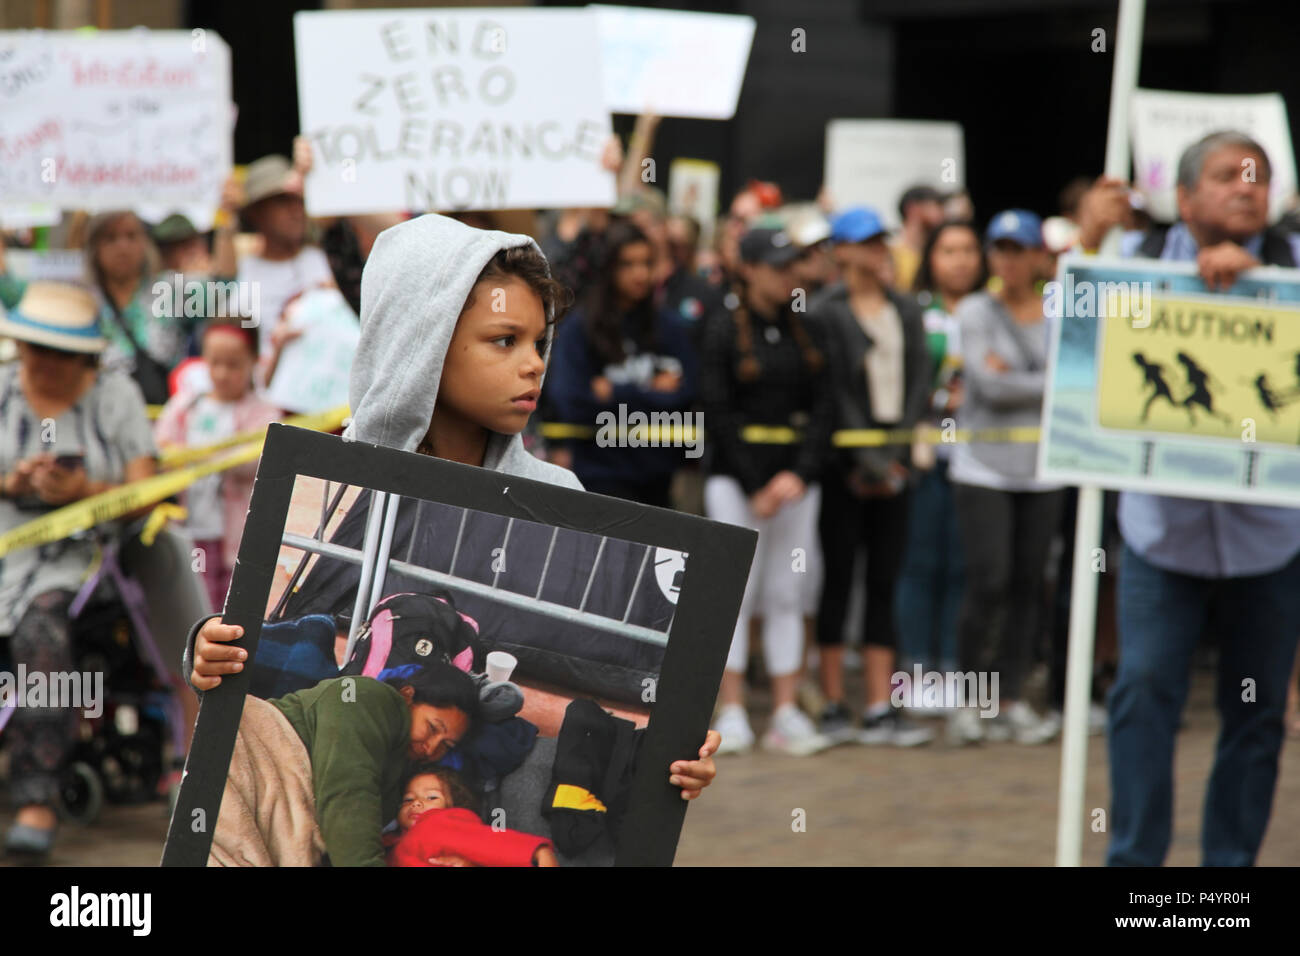 San Diego, USA. 23rd June, 2018. A boy takes part in the 'Families Belong Together' protest in San Diego, the United States, on June 23, 2018. Thousands of people marched in protest in the U.S.-Mexico border city of San Diego on Saturday, raising slogans against the Trump administration's policy of separating children from immigrant parents. Credit: Gao Shan/Xinhua/Alamy Live News Stock Photo